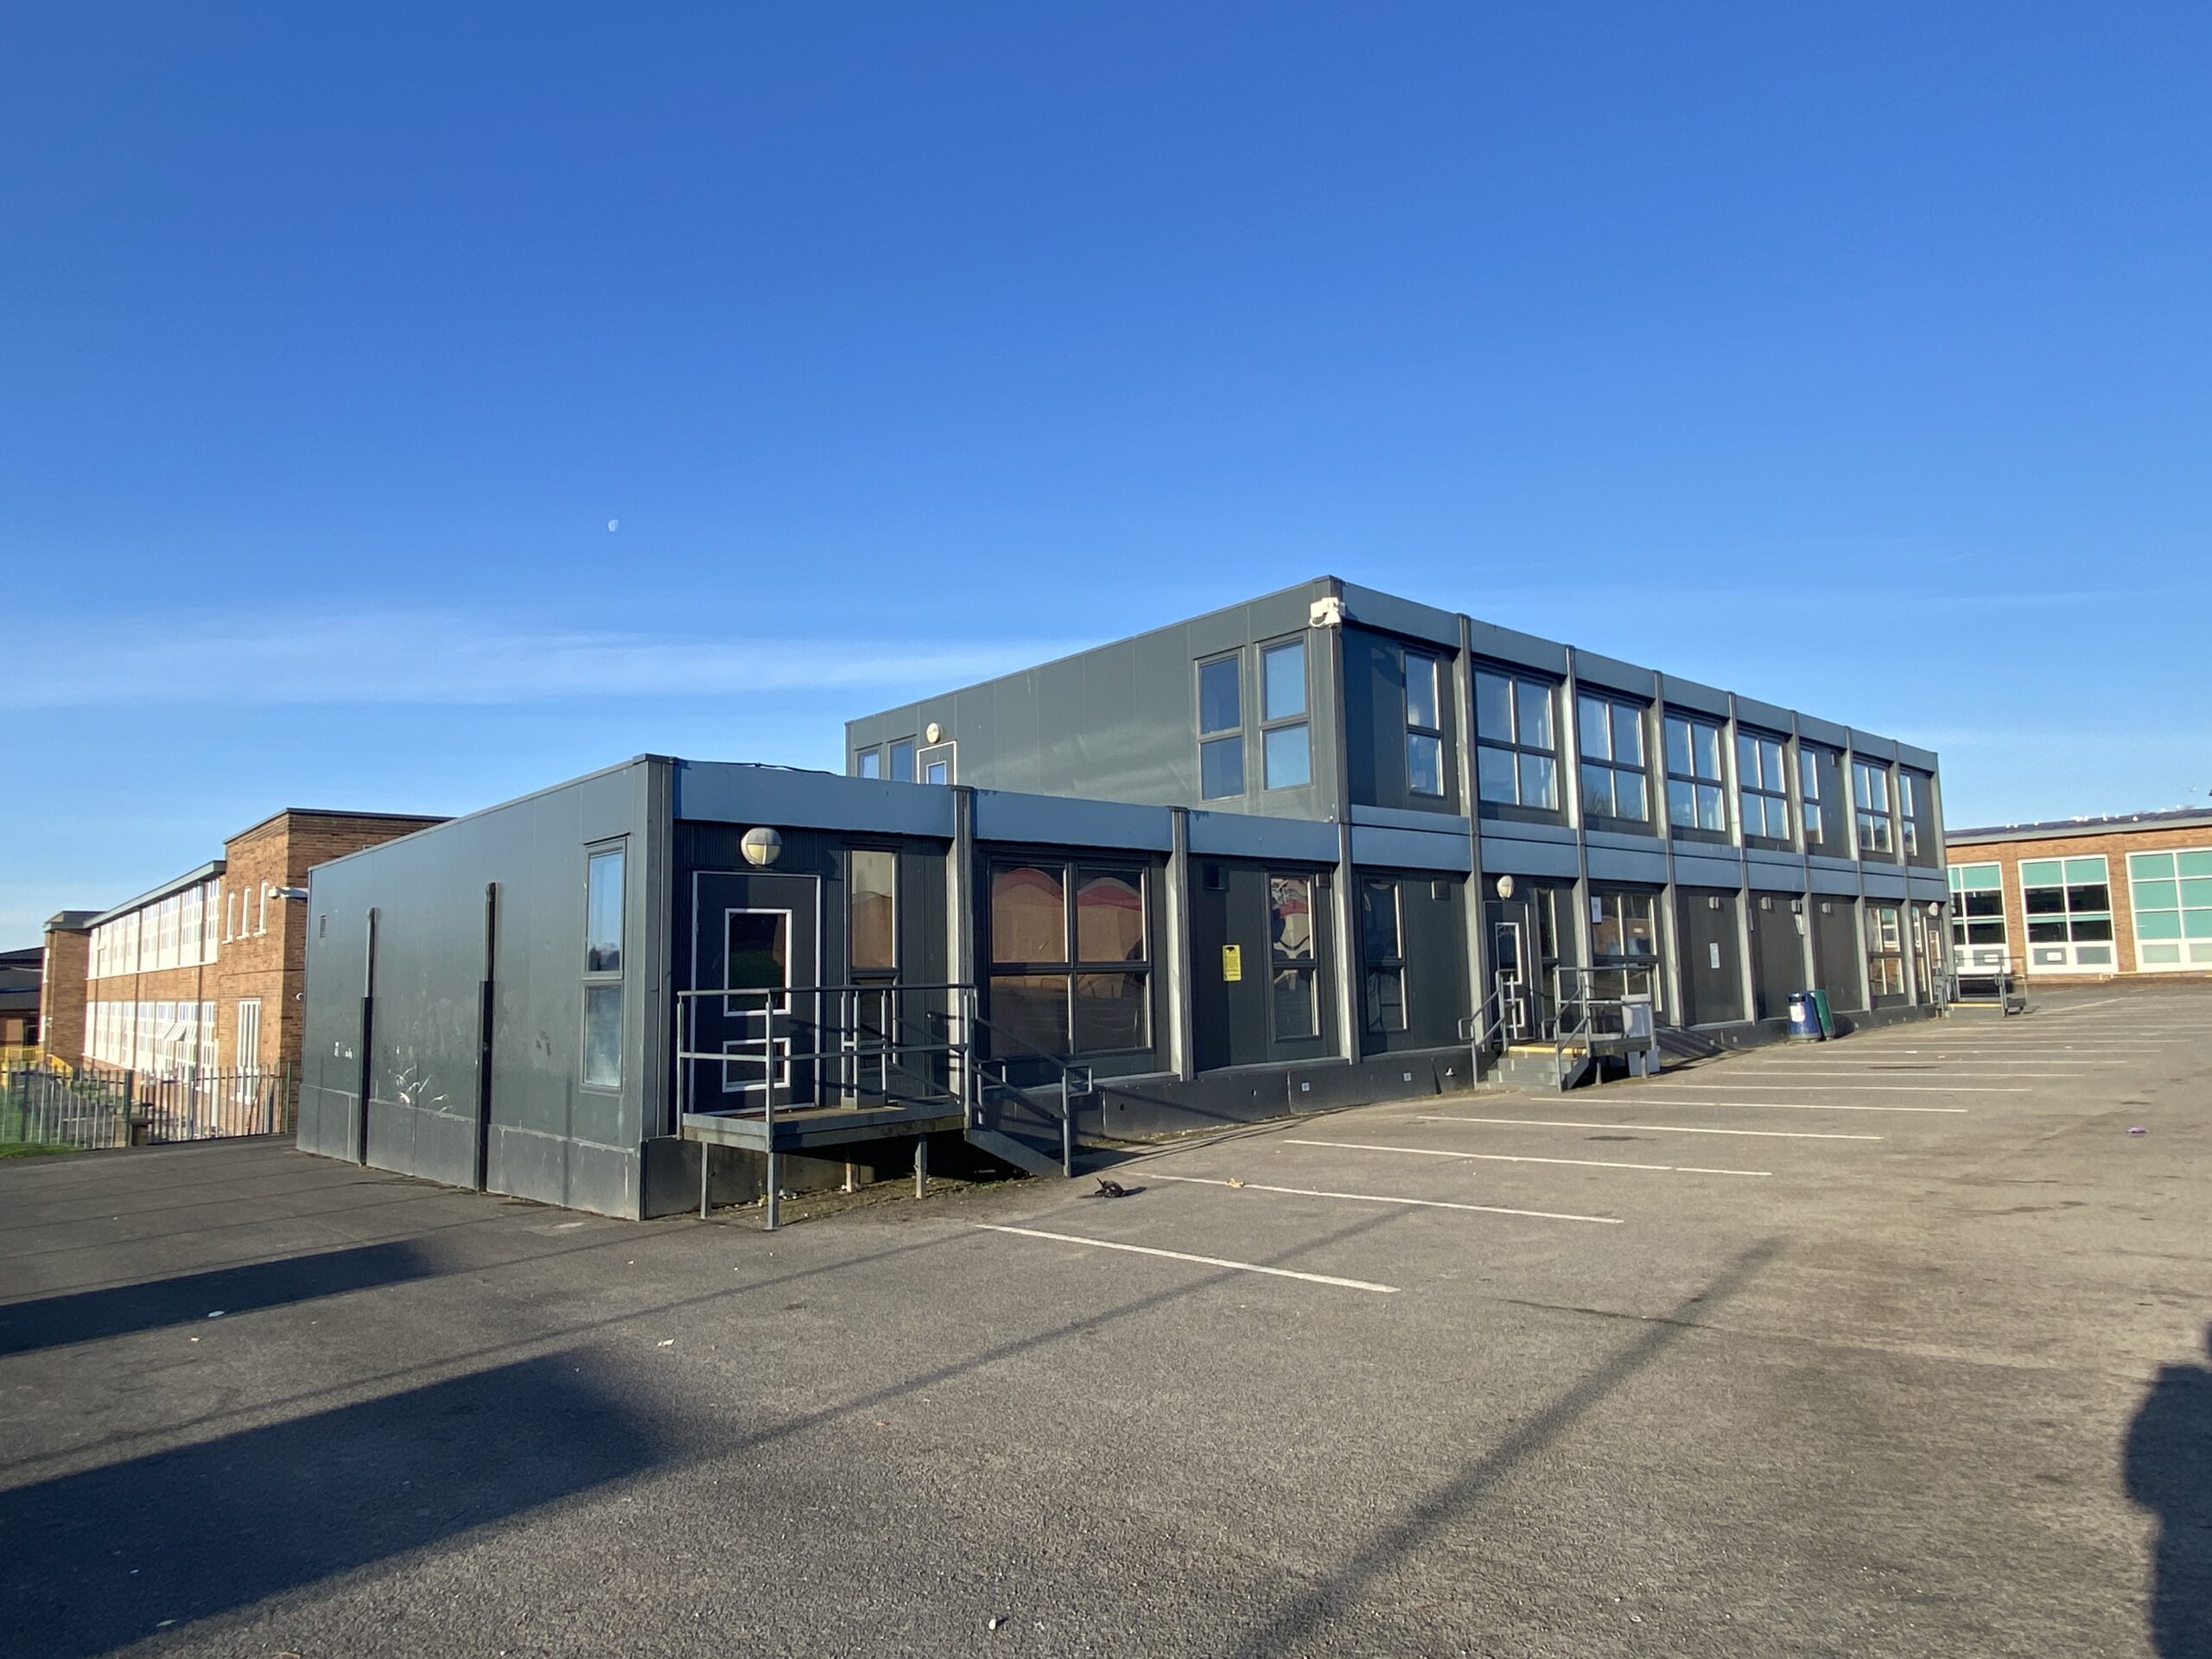 250 Temporary Classrooms Are Ordered In Wake Of RAAC Crisis